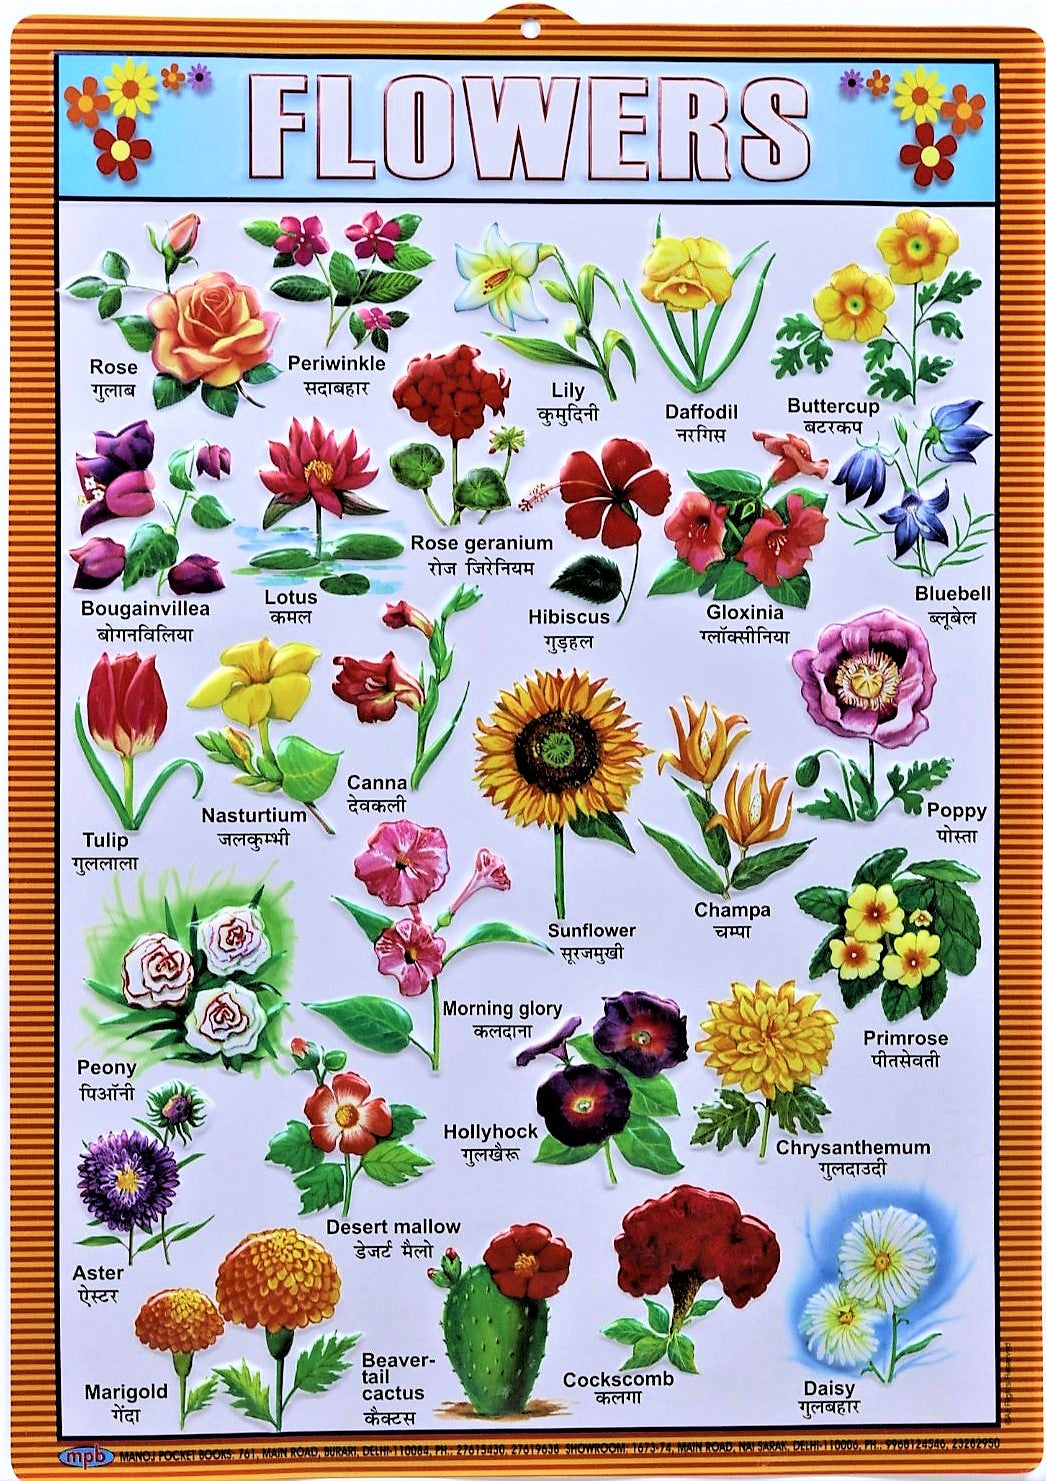 Flower Chart – Large Vibrant Color chart for Flowers - Words in English and Hindi for Study Room, School for Kids (59.5x42.3 cm)  - Laminated Paper Tear free hanging hole